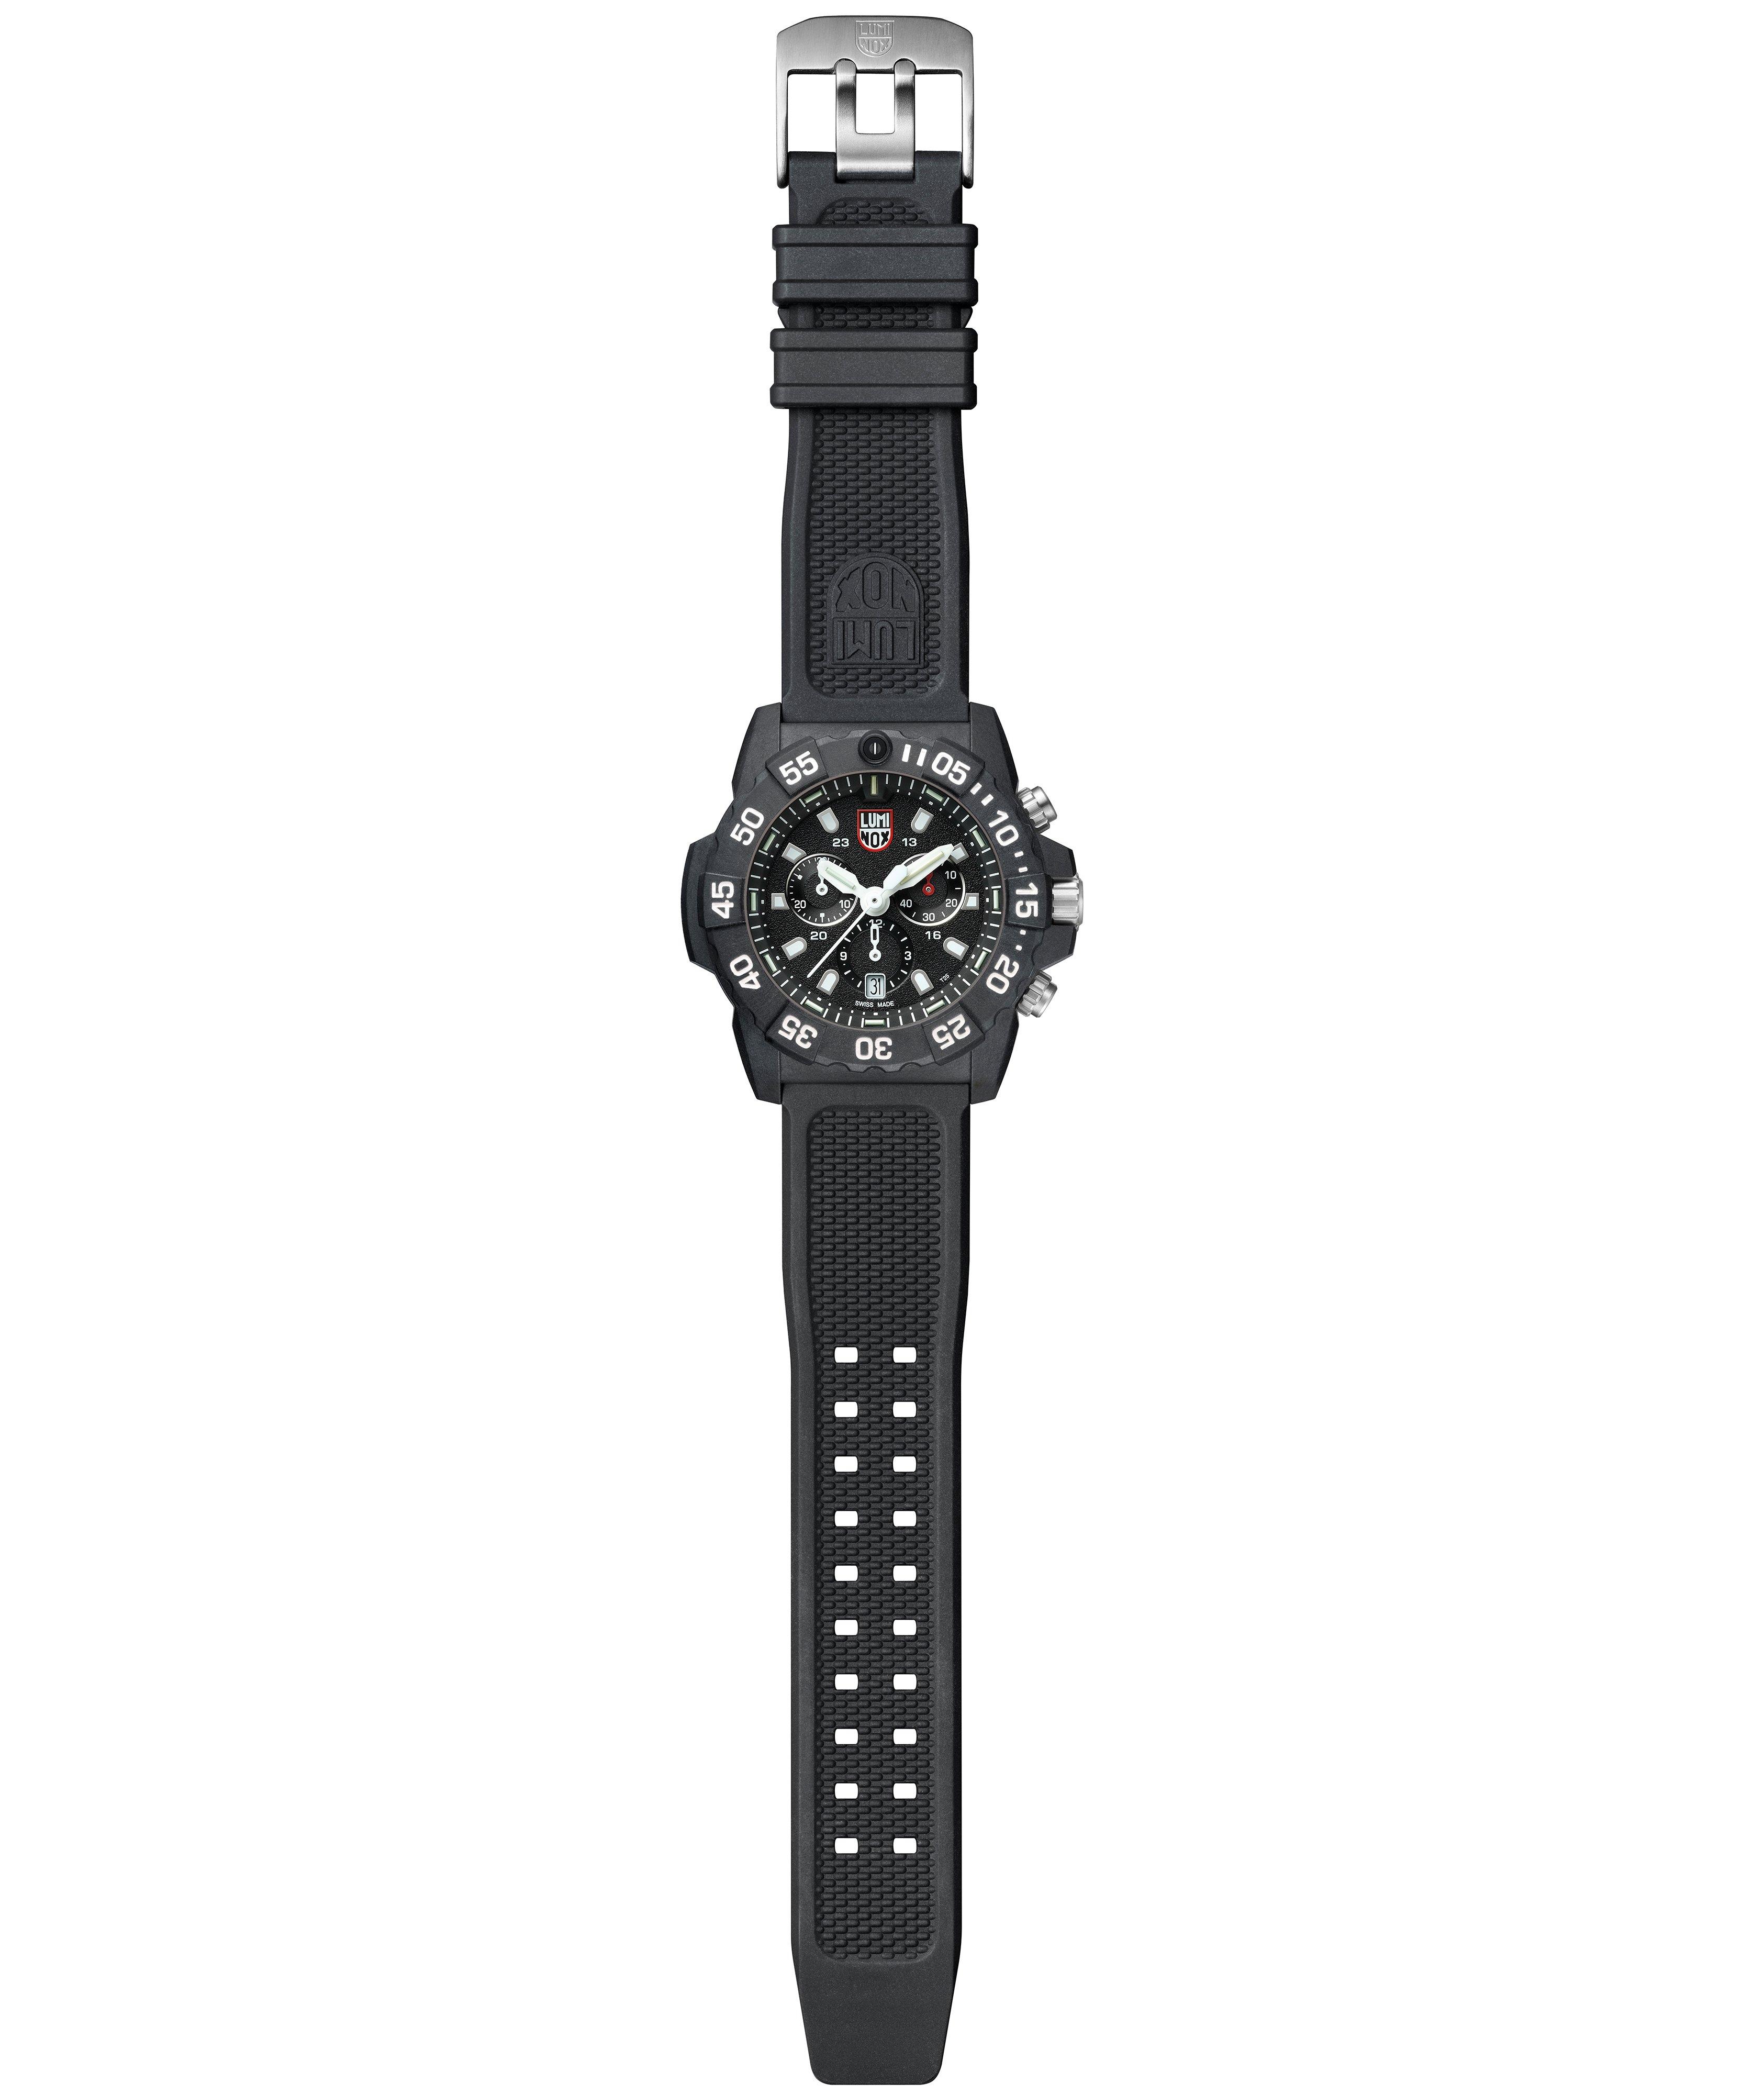 Montre-chronographe 3581, collection Navy Seal image 2